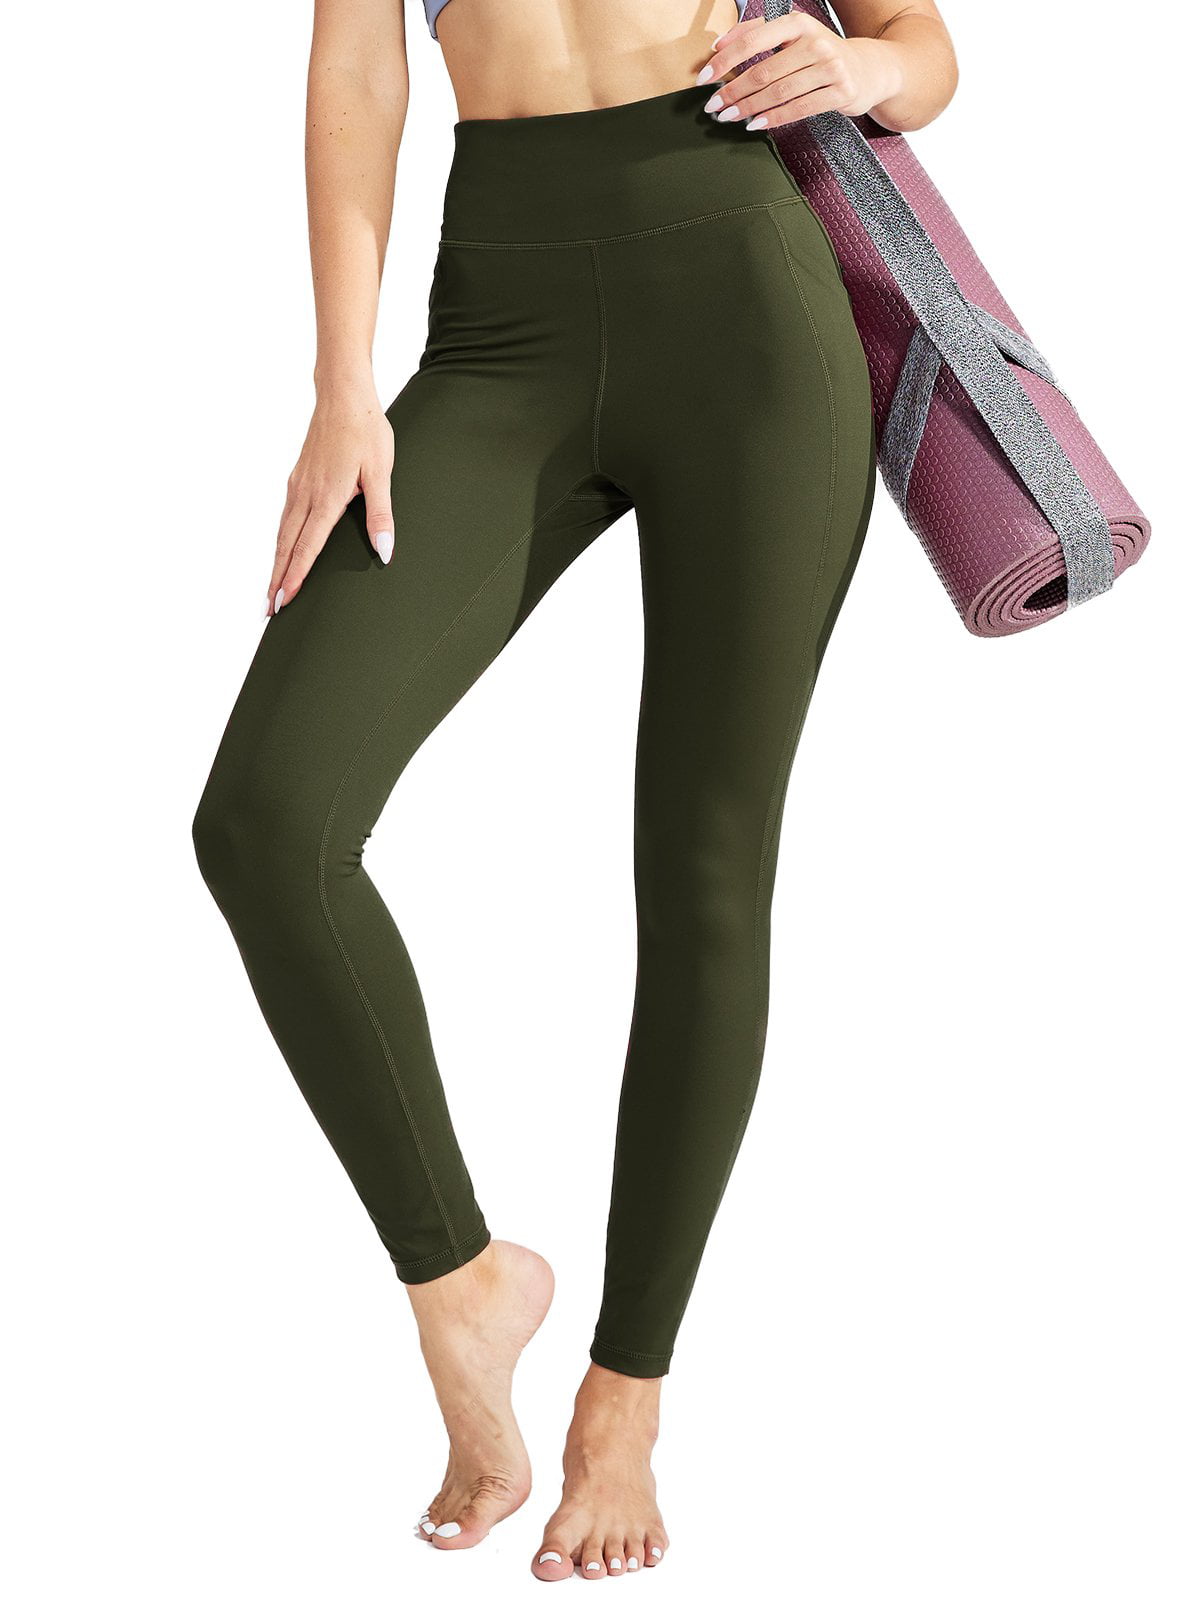  MIER Yoga Workout Leggings for Women with Inside Pocket, High  Waist Tummy Control Gym Running Compression Pants Non See Through, Army  Green, XS : Clothing, Shoes & Jewelry